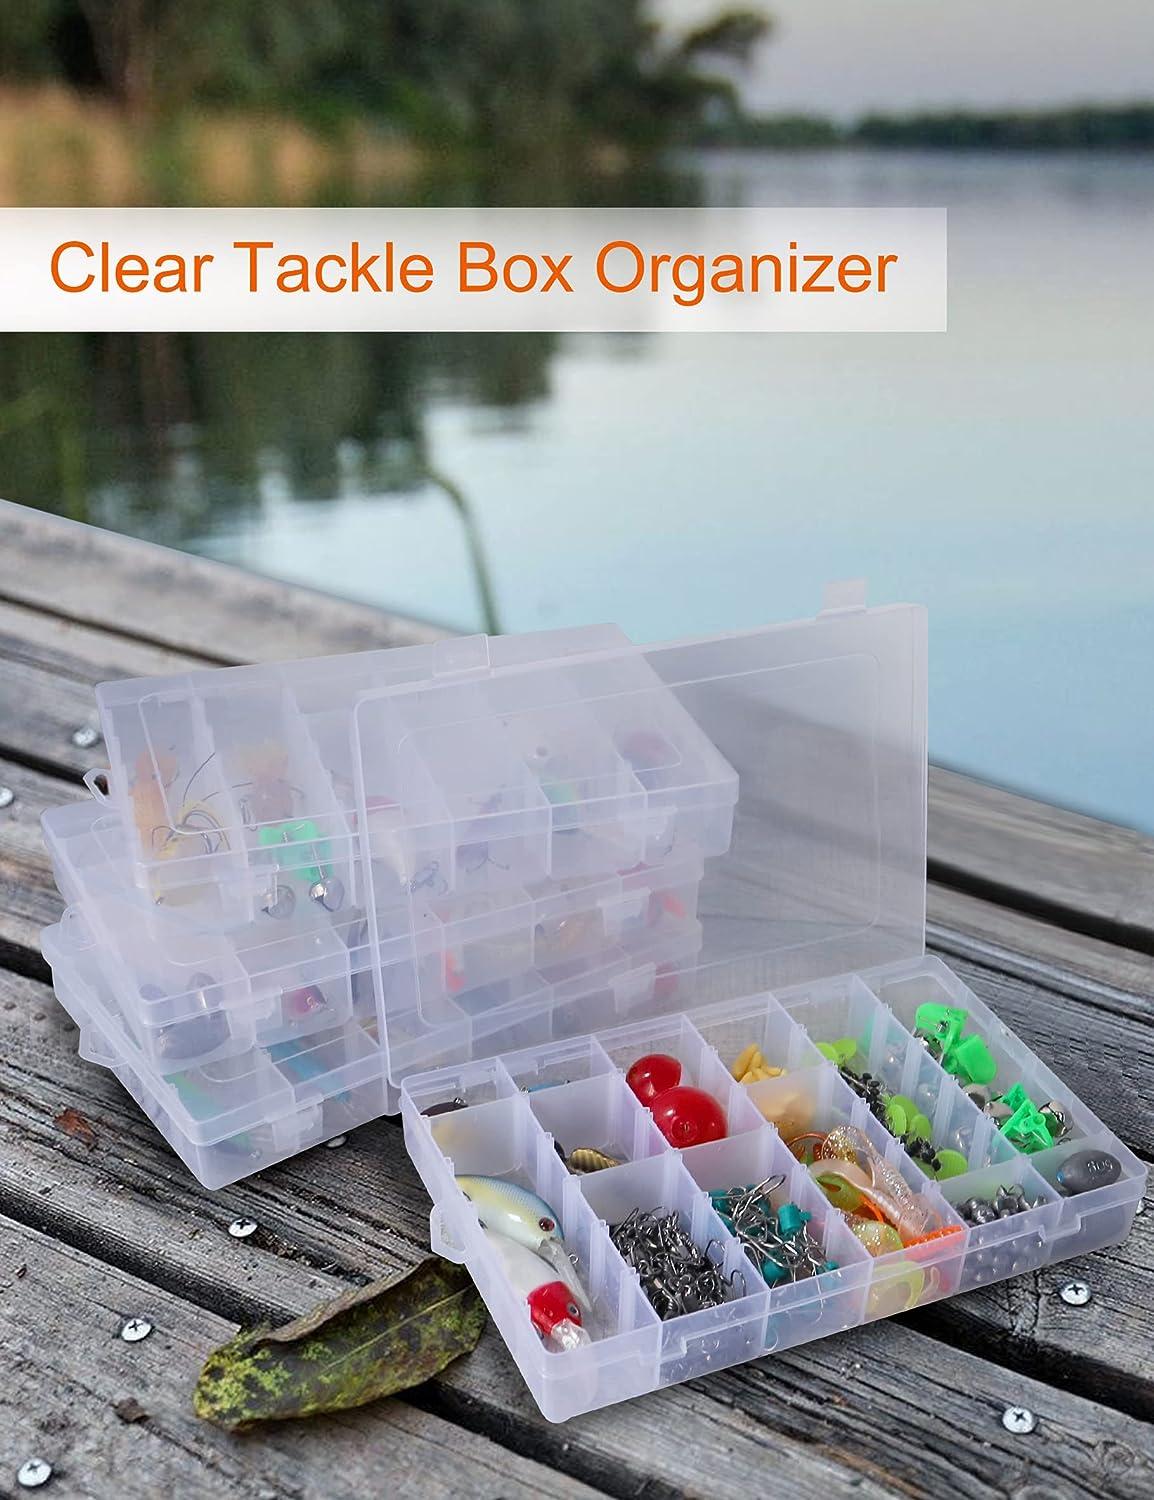 Sjqecyfv Tackle Box Organizer 18 Grids Plastic Craft Box Organizer Bead  Organizer Clear Fishing Box with Dividers, 1 Pack 18 Grids,1 Pack